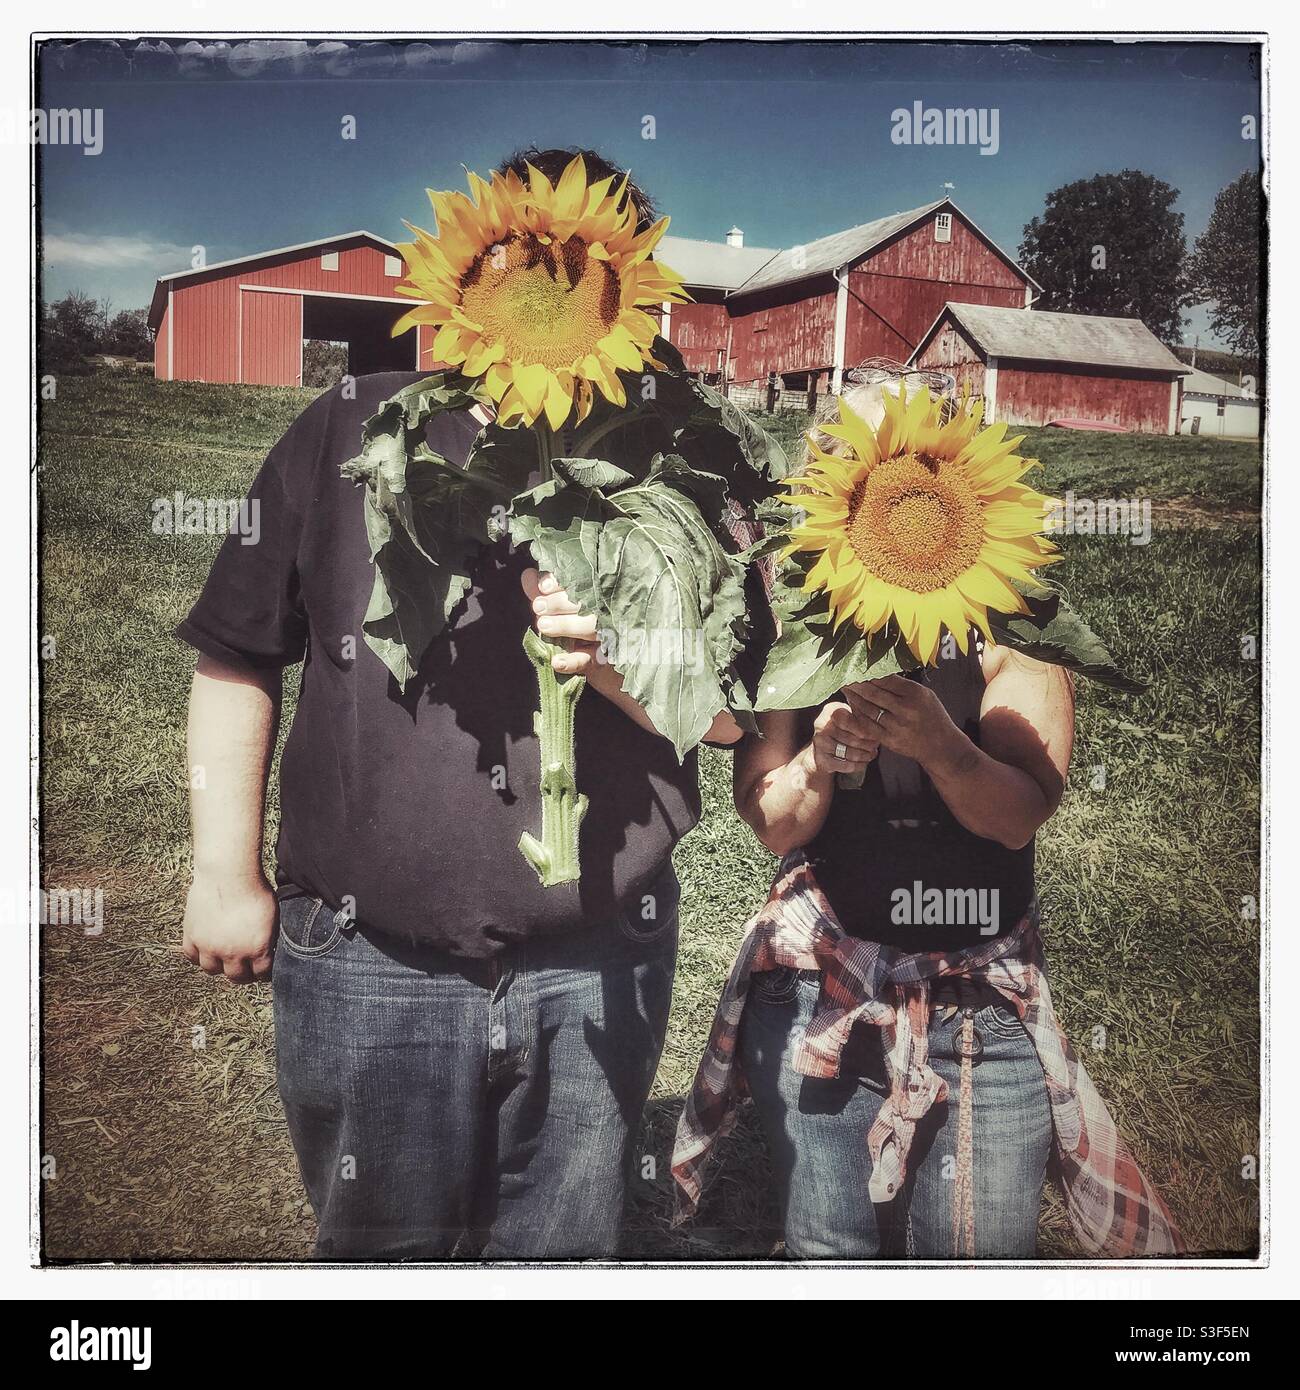 Man and woman holding large sunflowers in front of their faces Stock Photo